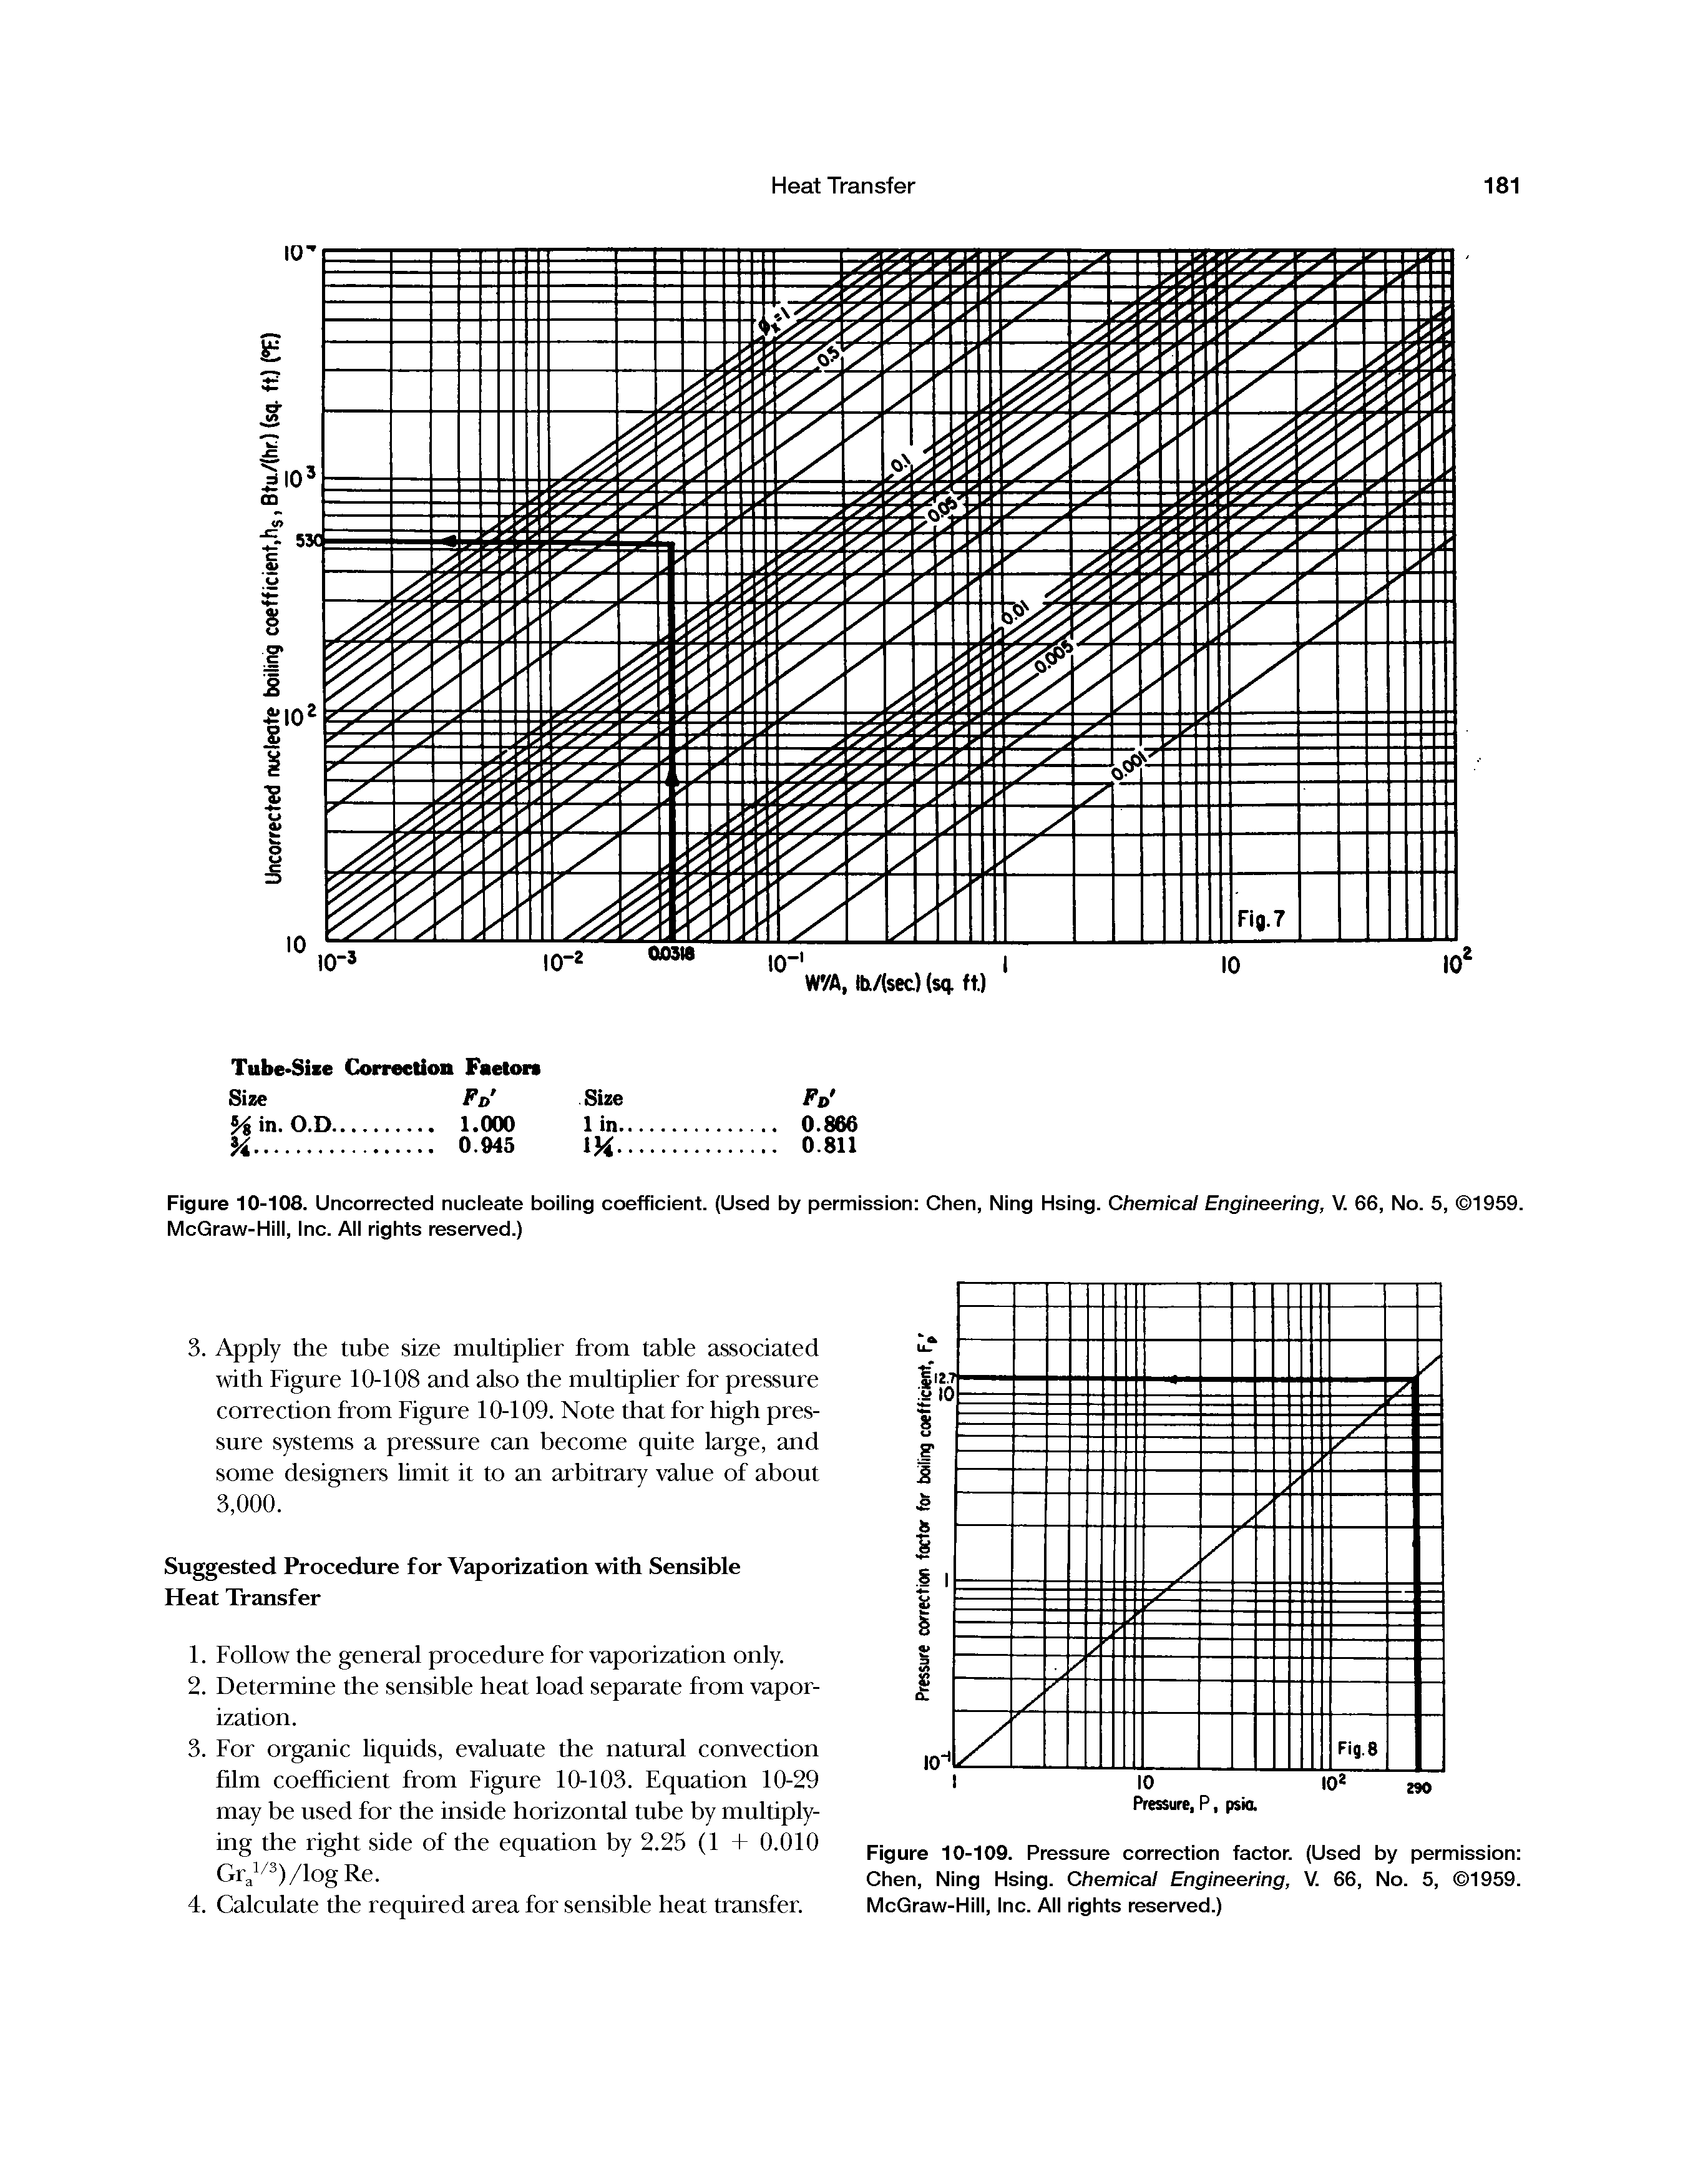 Figure 10-109. Pressure correction factor. (Used by permission Chen, Ning Hsing. Chemical Engineering, V. 66, No. 5, 1959. McGraw-Hill, Inc. All rights reserved.)...